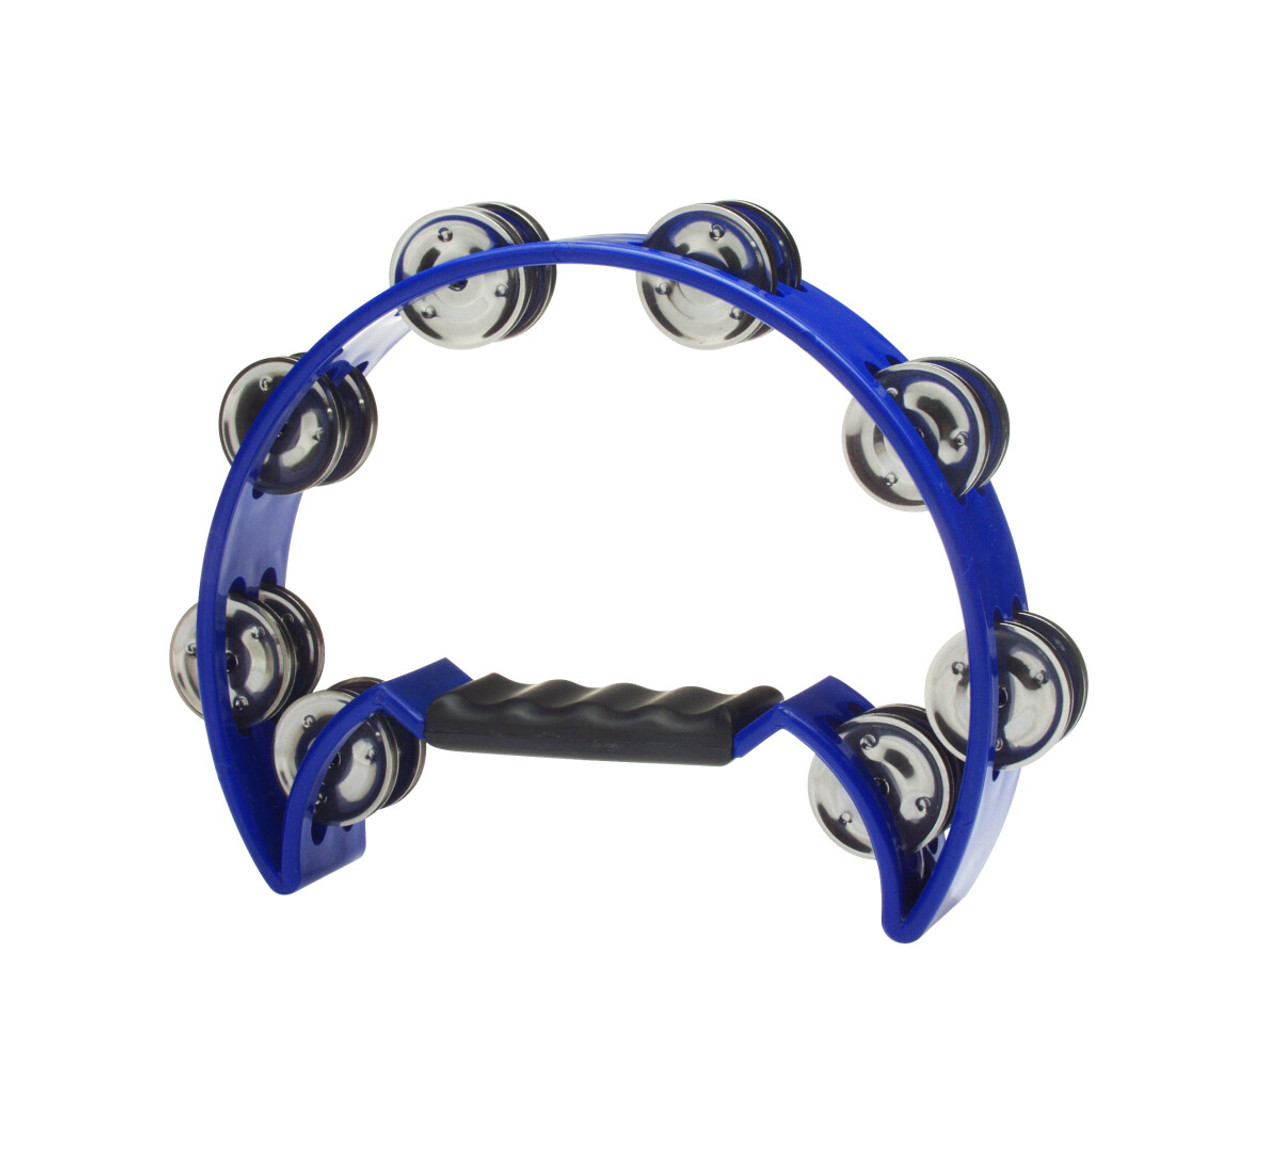 Stagg Cutaway Plastic Tambourine with 16 Jingles Blue